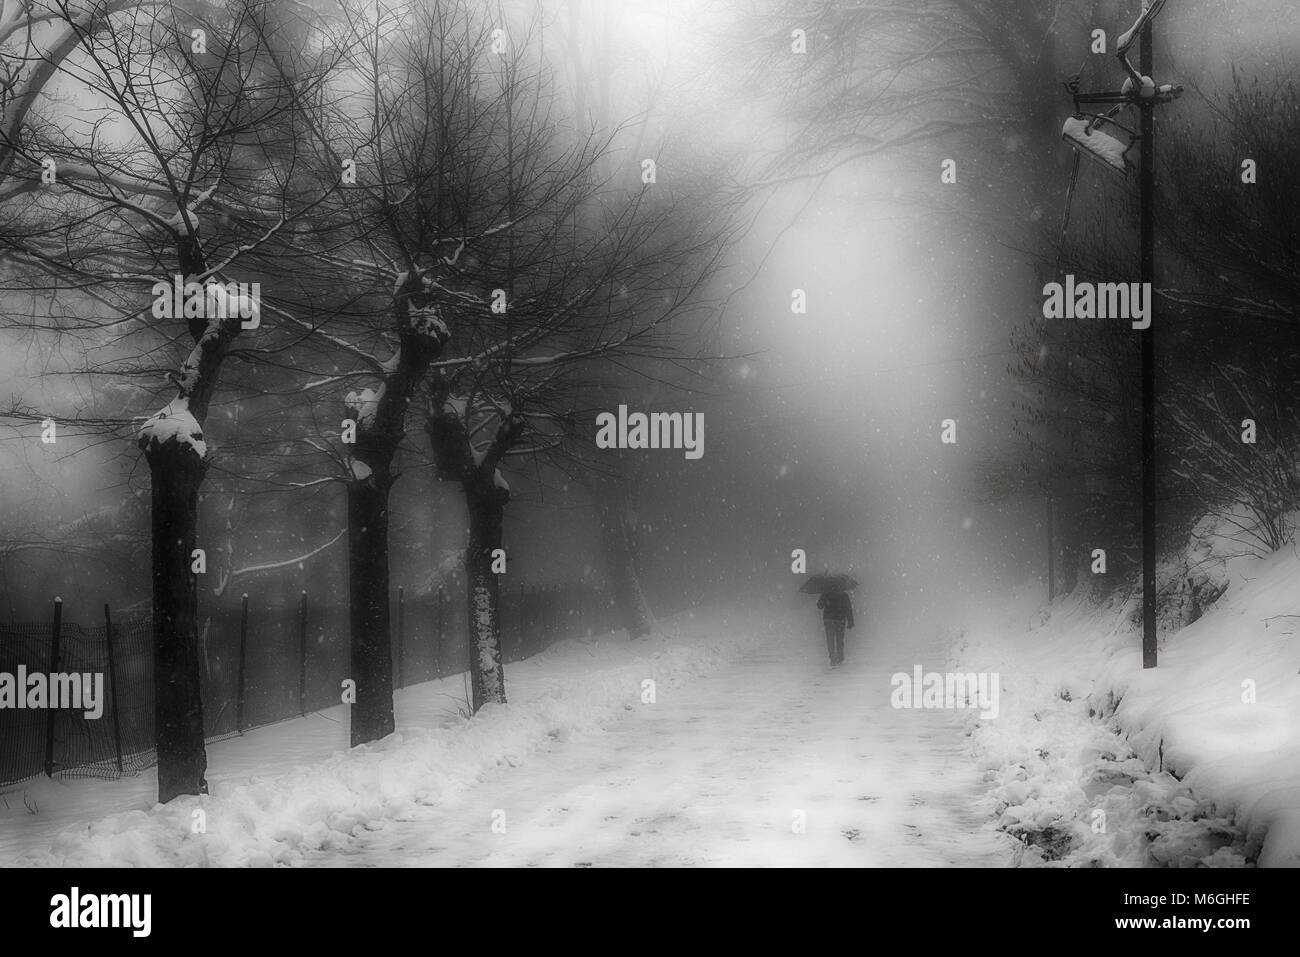 A man walking on the street under the snow in a foggy winter morning Stock Photo